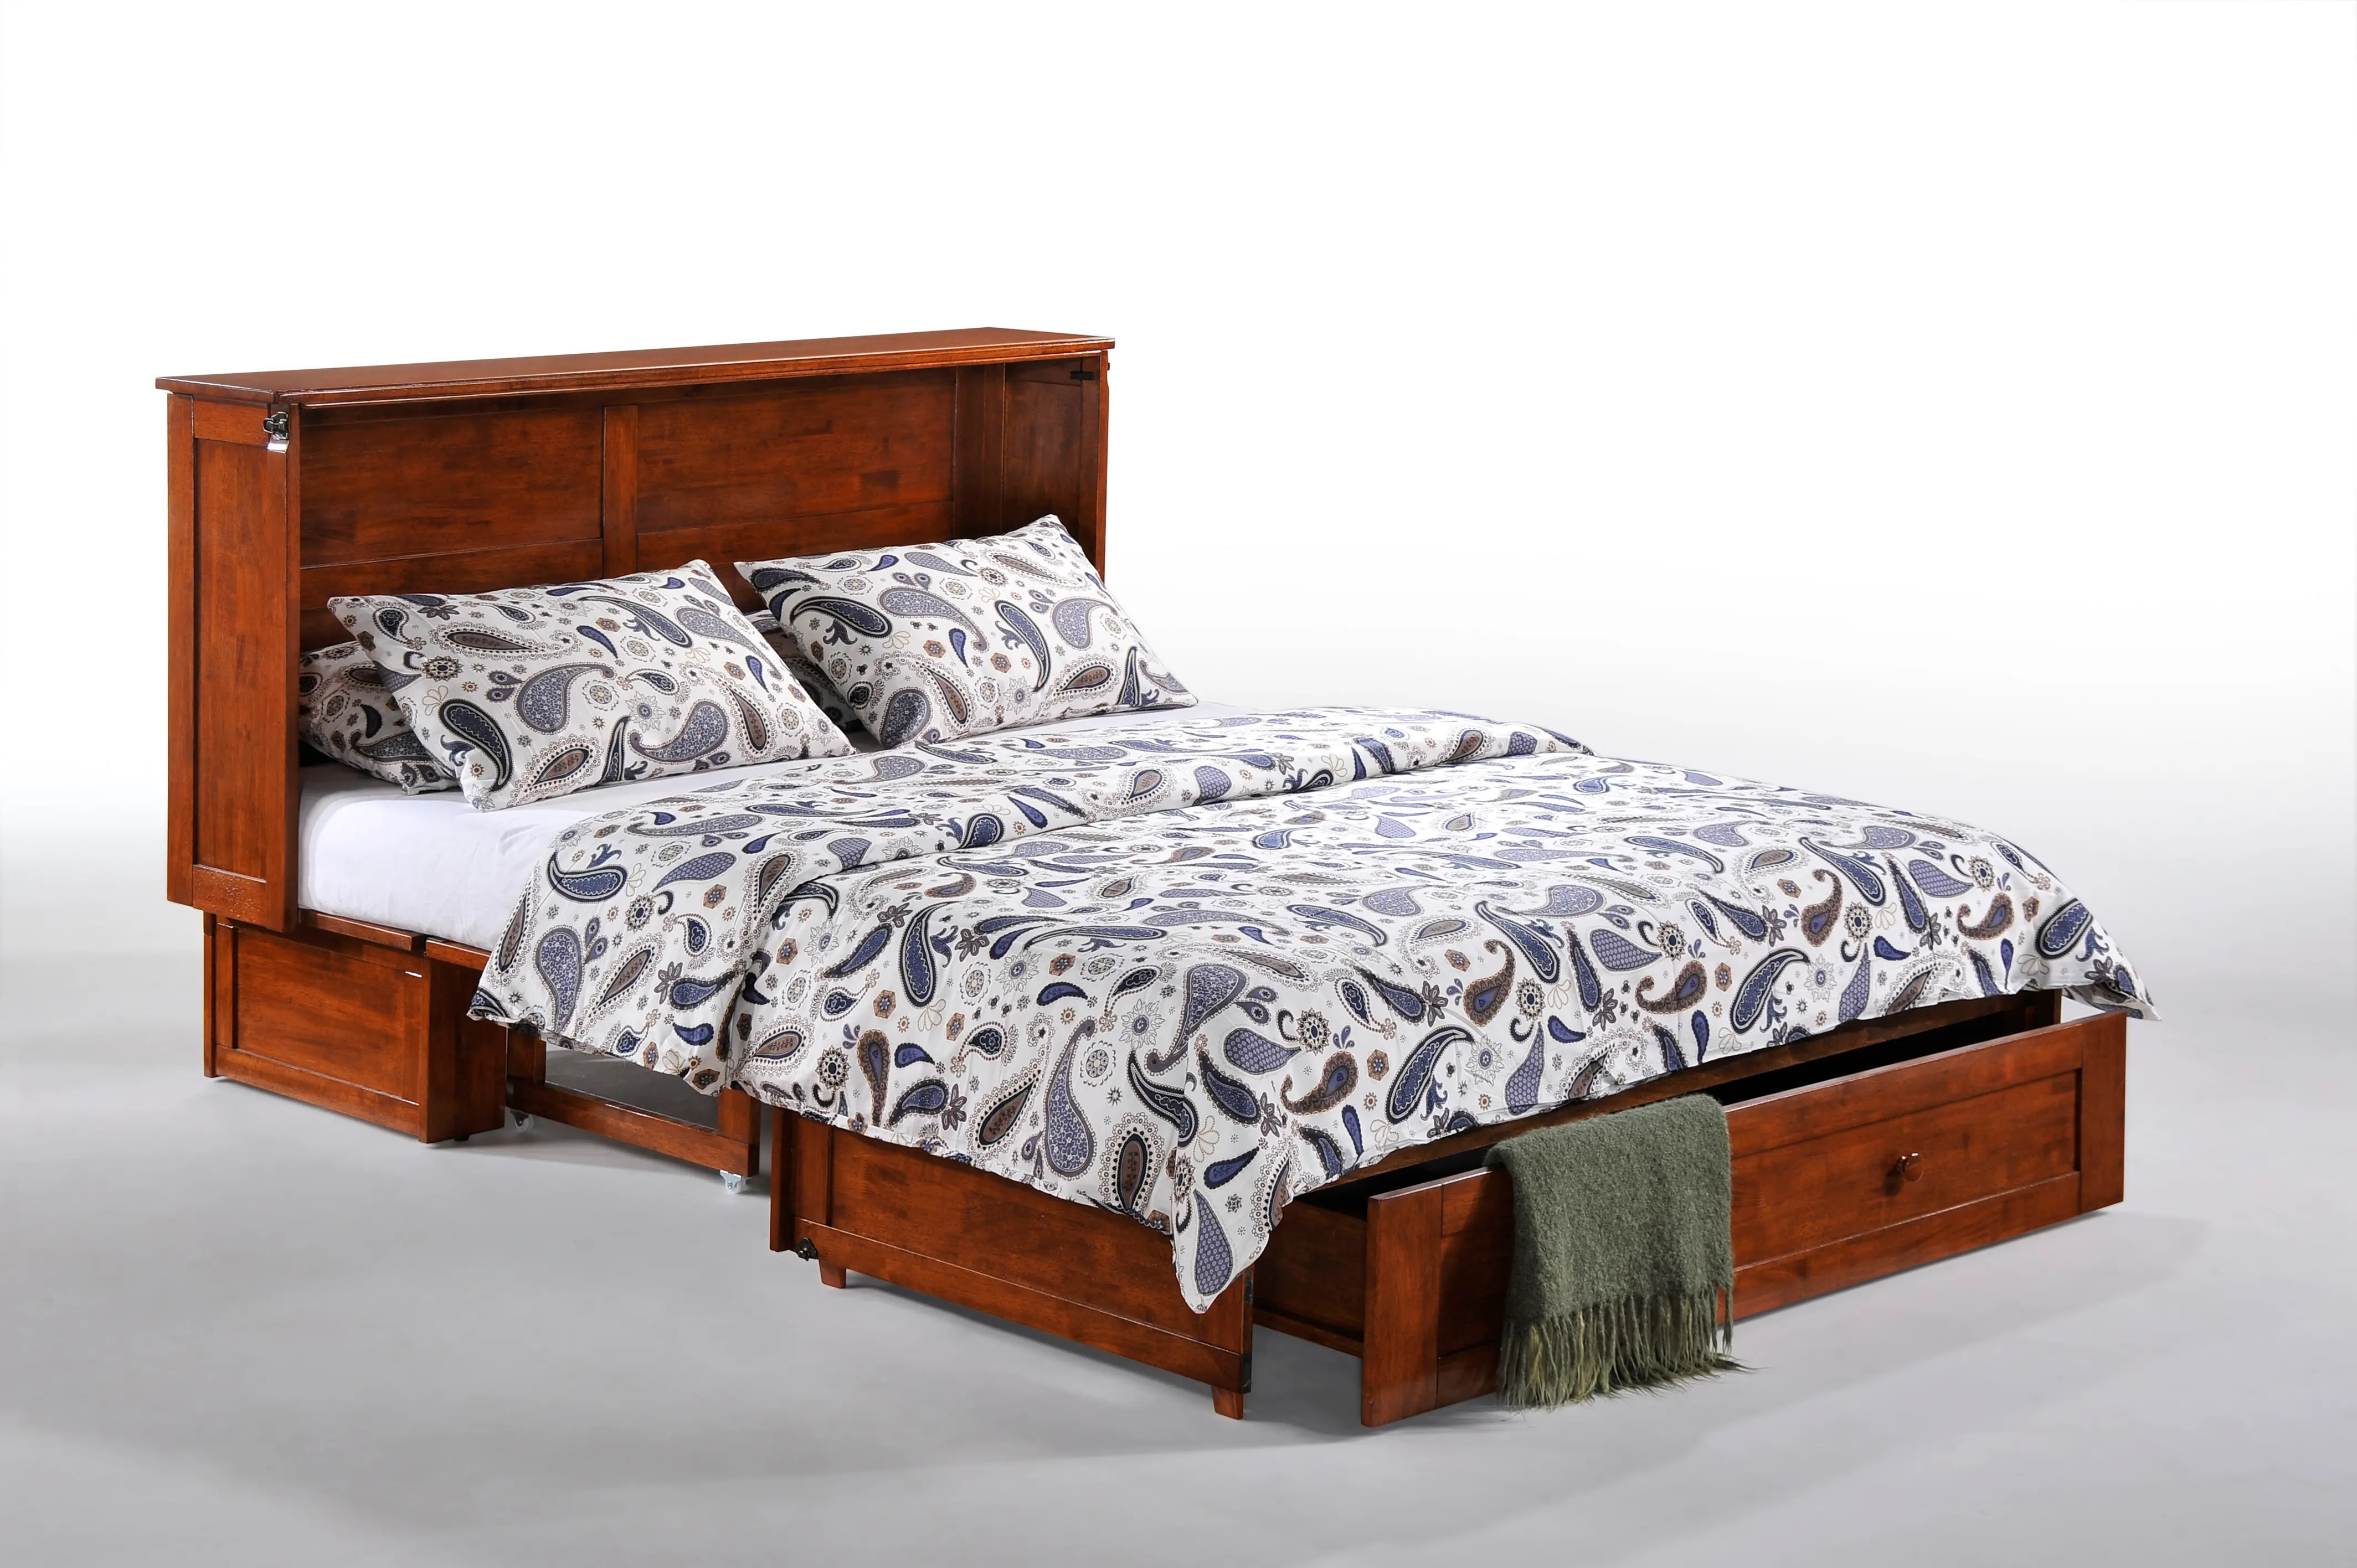 https://static.rcwilley.com/products/111368730/Classic-Cherry-Brown-Queen-Murphy-Bed---Clover-rcwilley-image1.webp